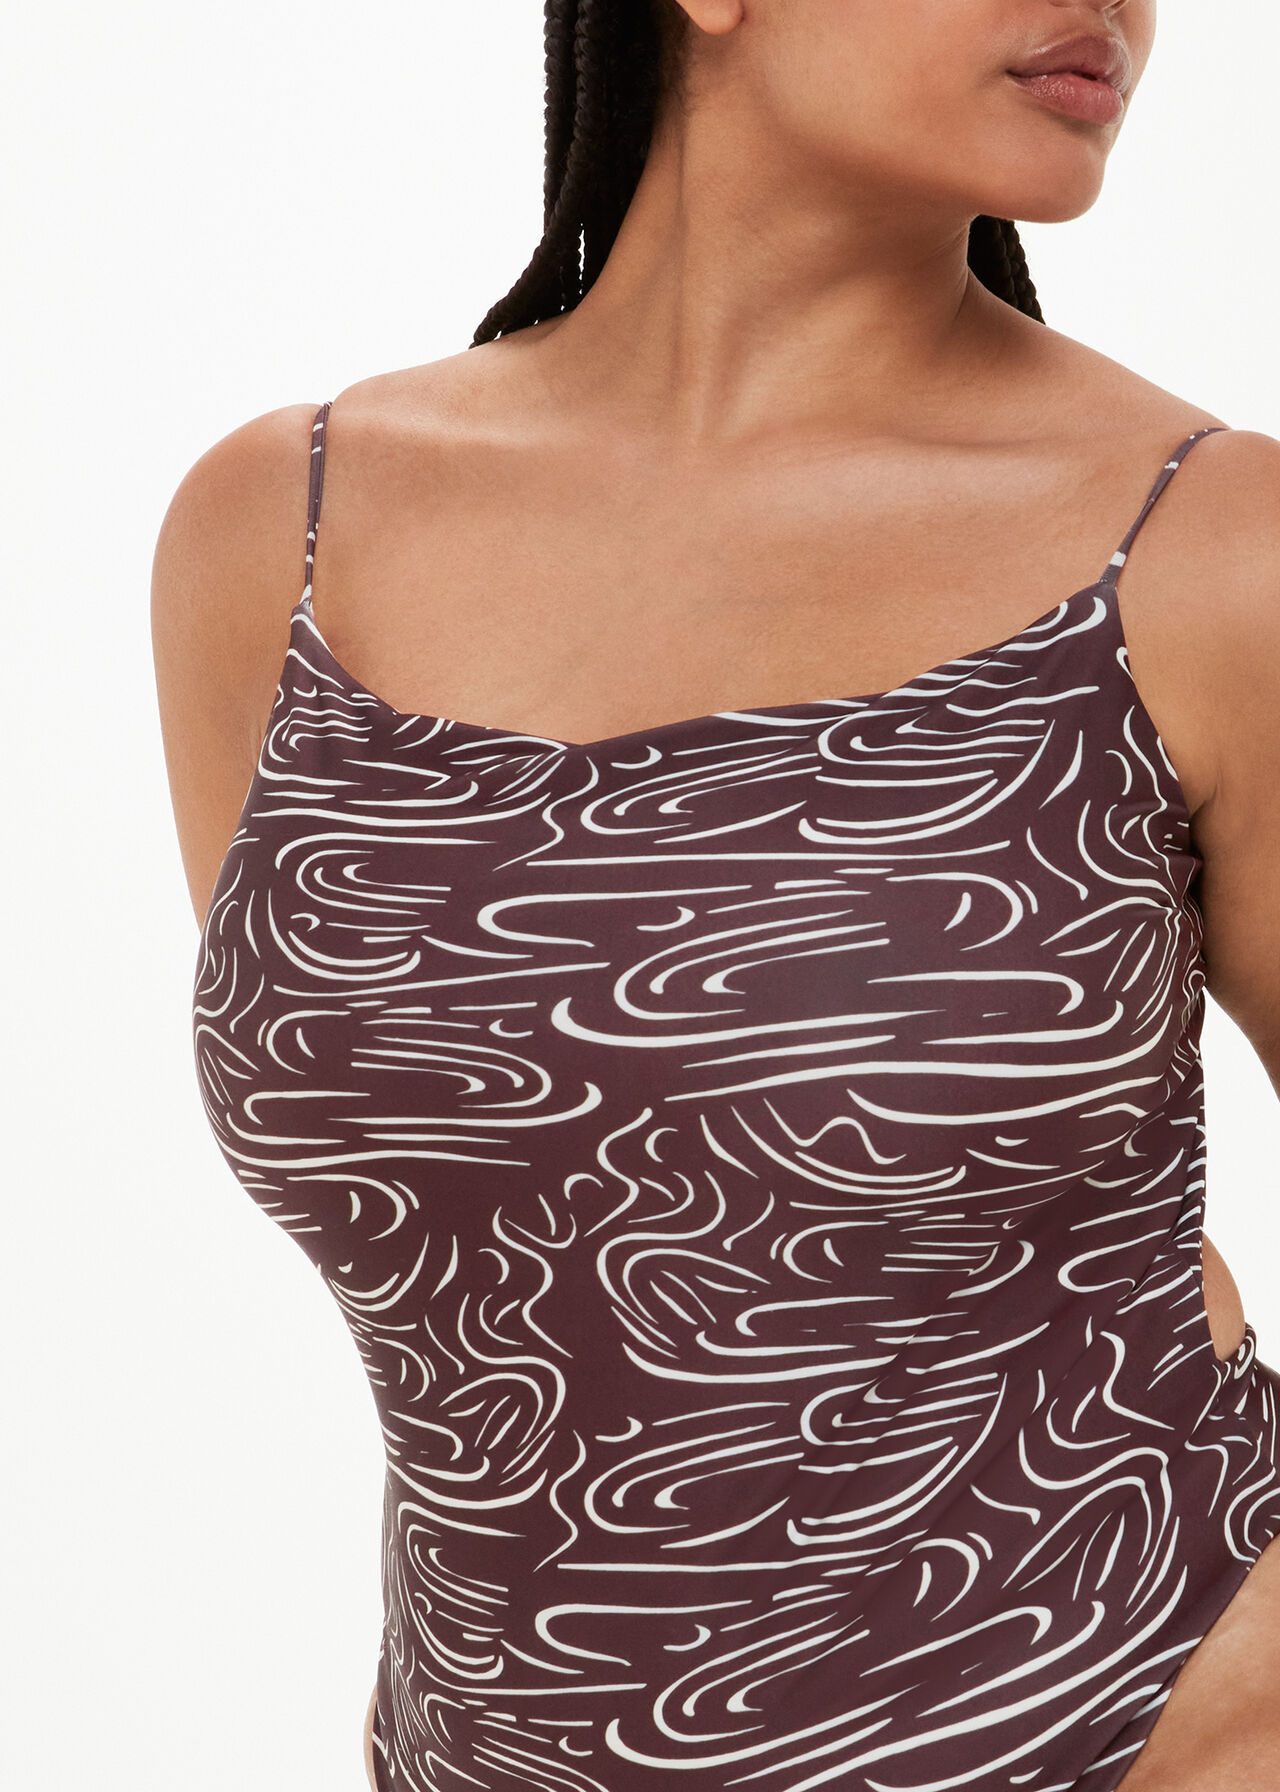 The Longing Wave Print Open-Back Swimsuit